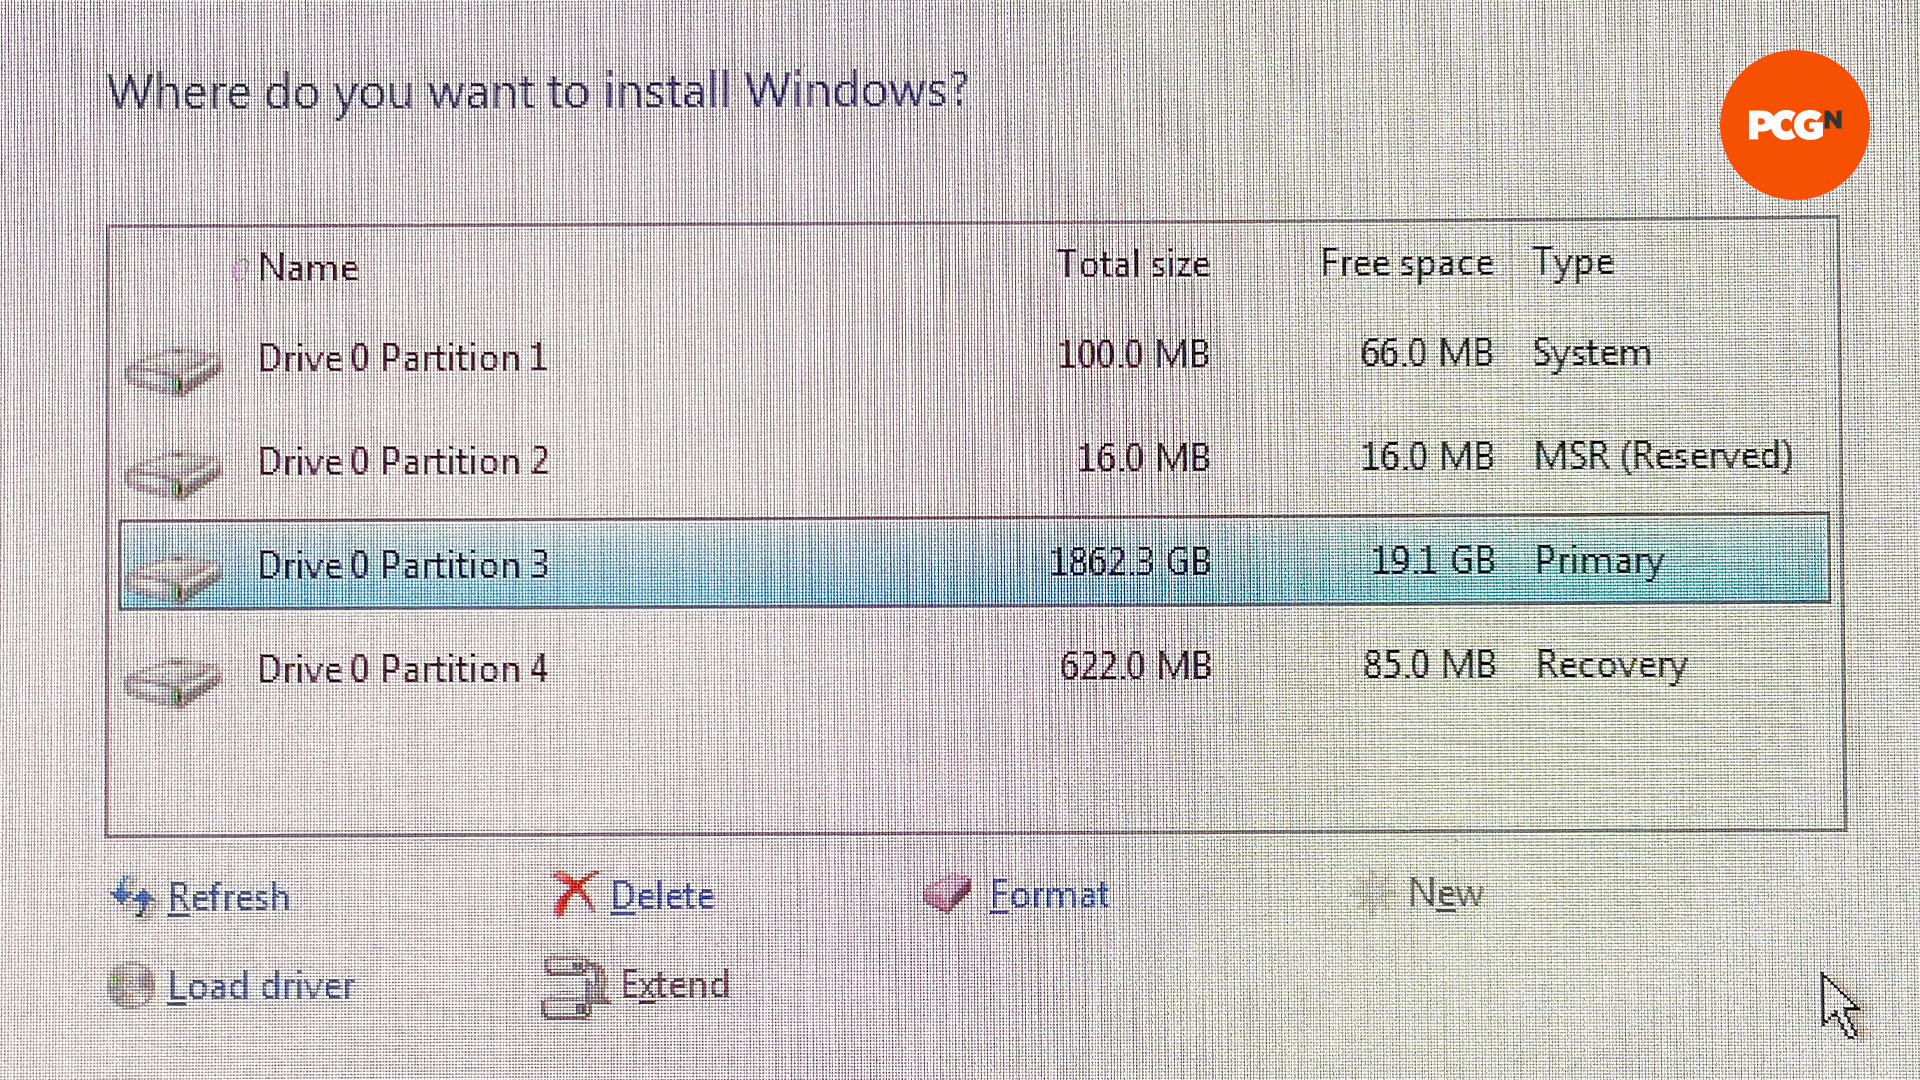 A window which asks the user which drive they want to install windows on